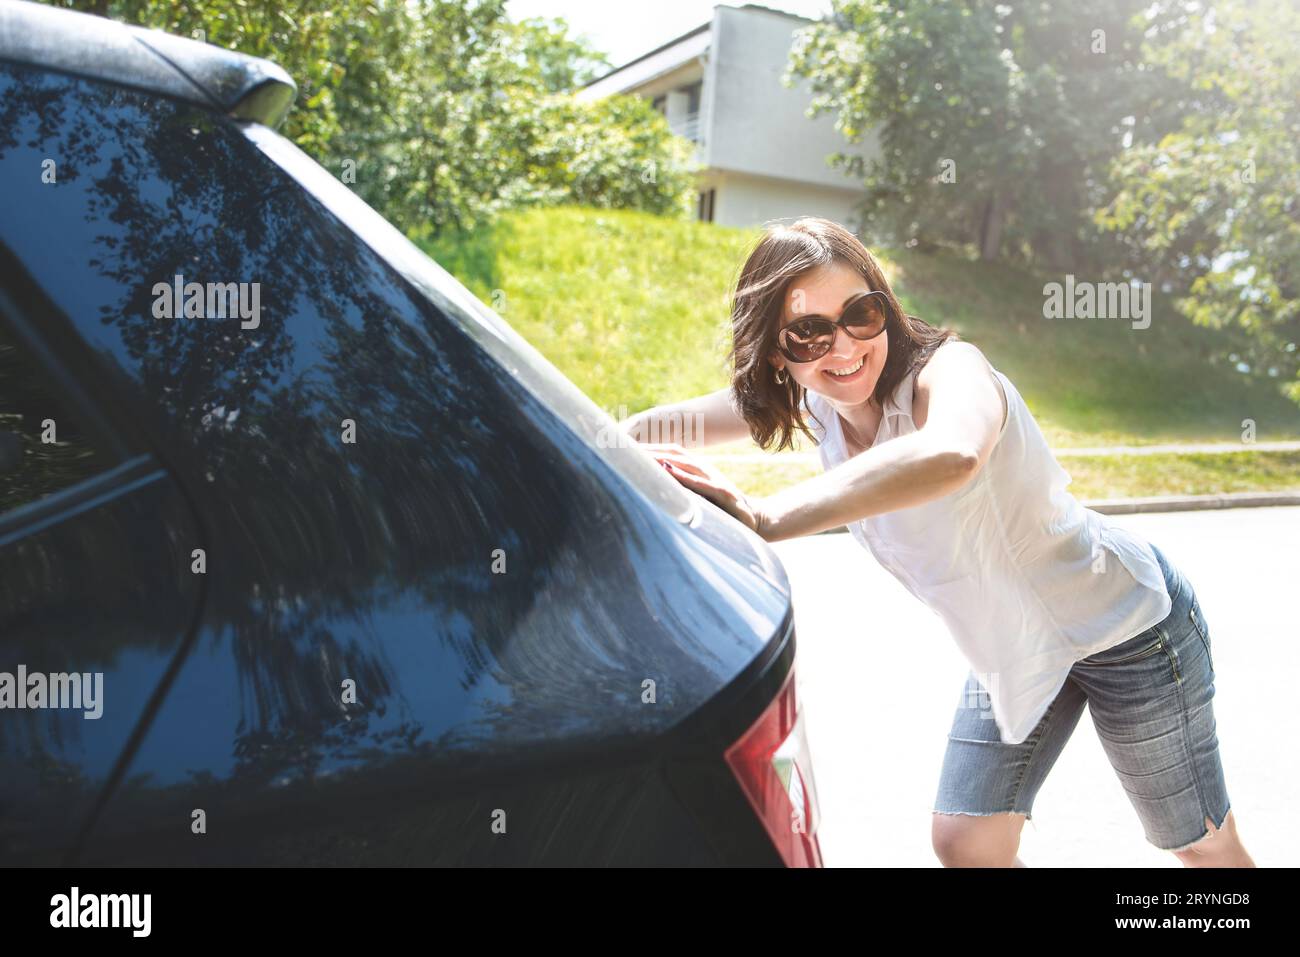 Smiling woman pushing broken car while her boyfriend is driving Stock Photo